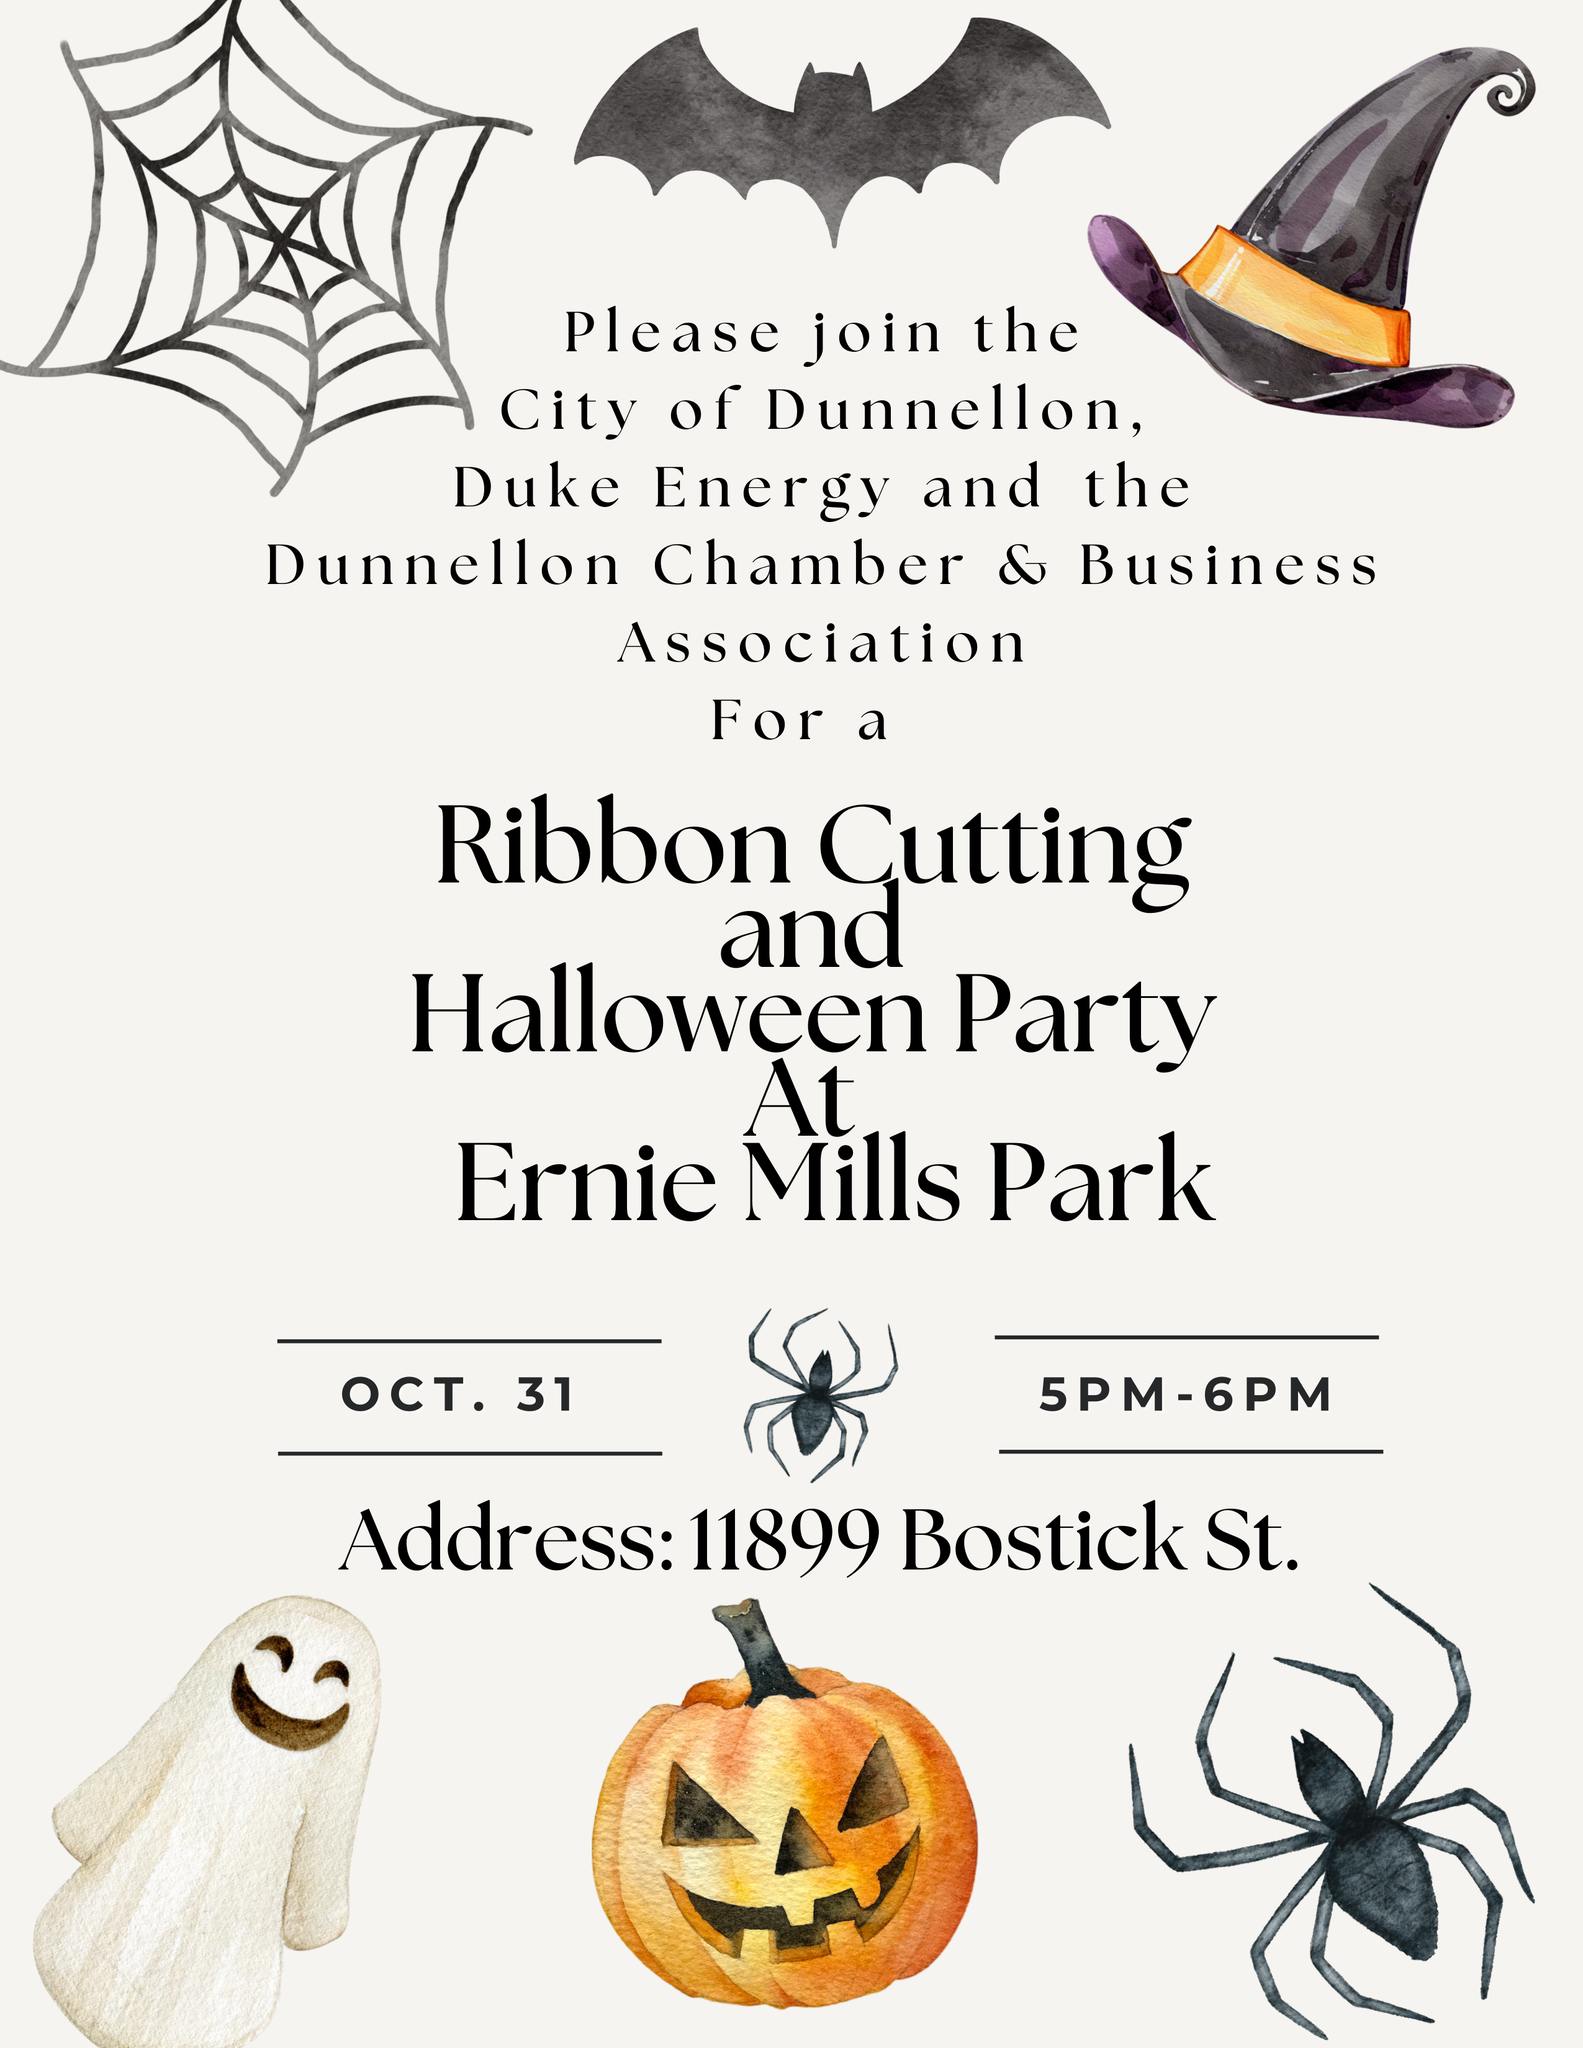 Ribbon Cutting and Halloween Party